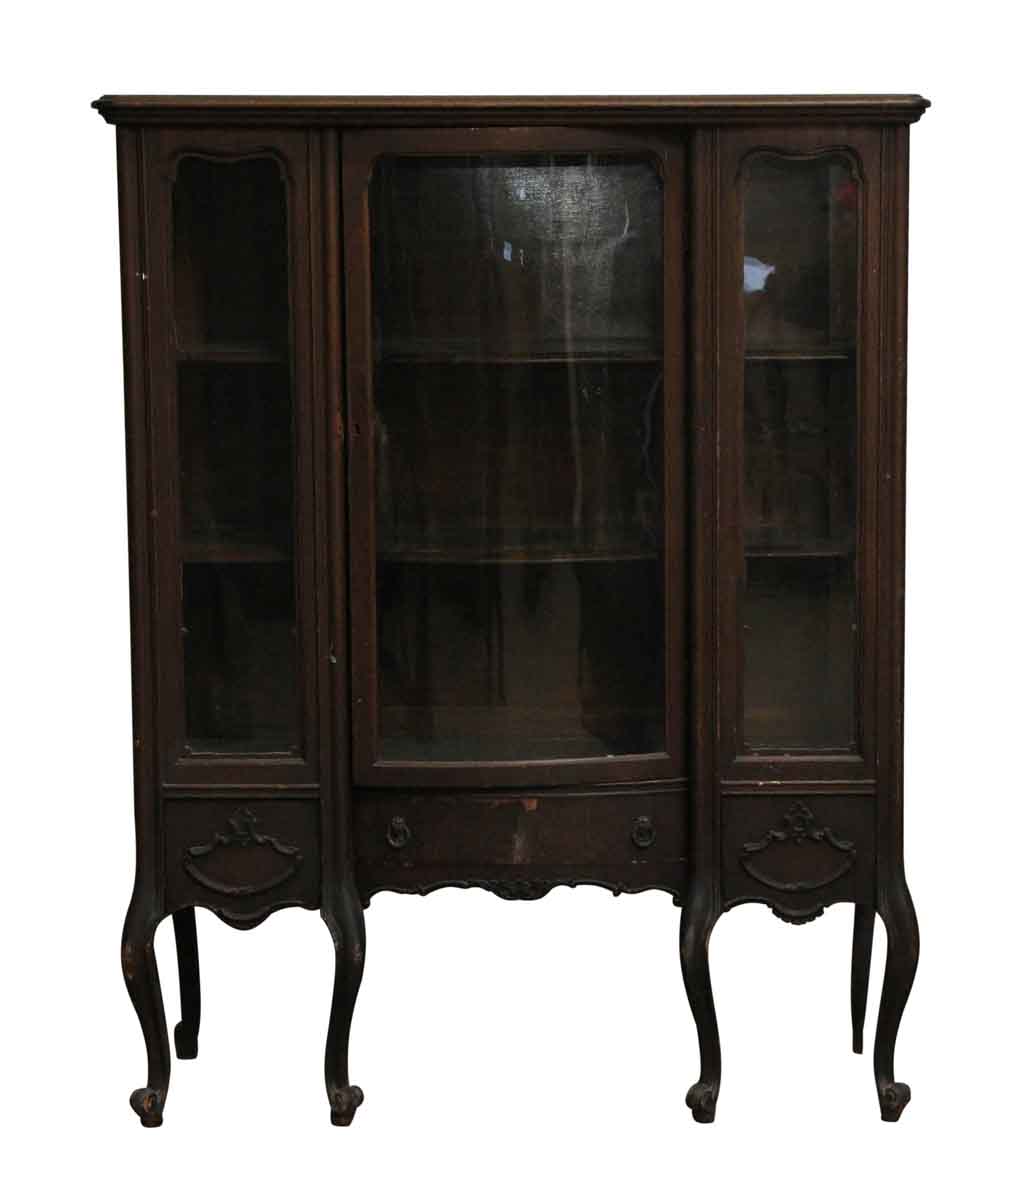 Antique Curved Leg Wooden Curio Cabinet, Pictures Of Antique Curio Cabinets In South Africa